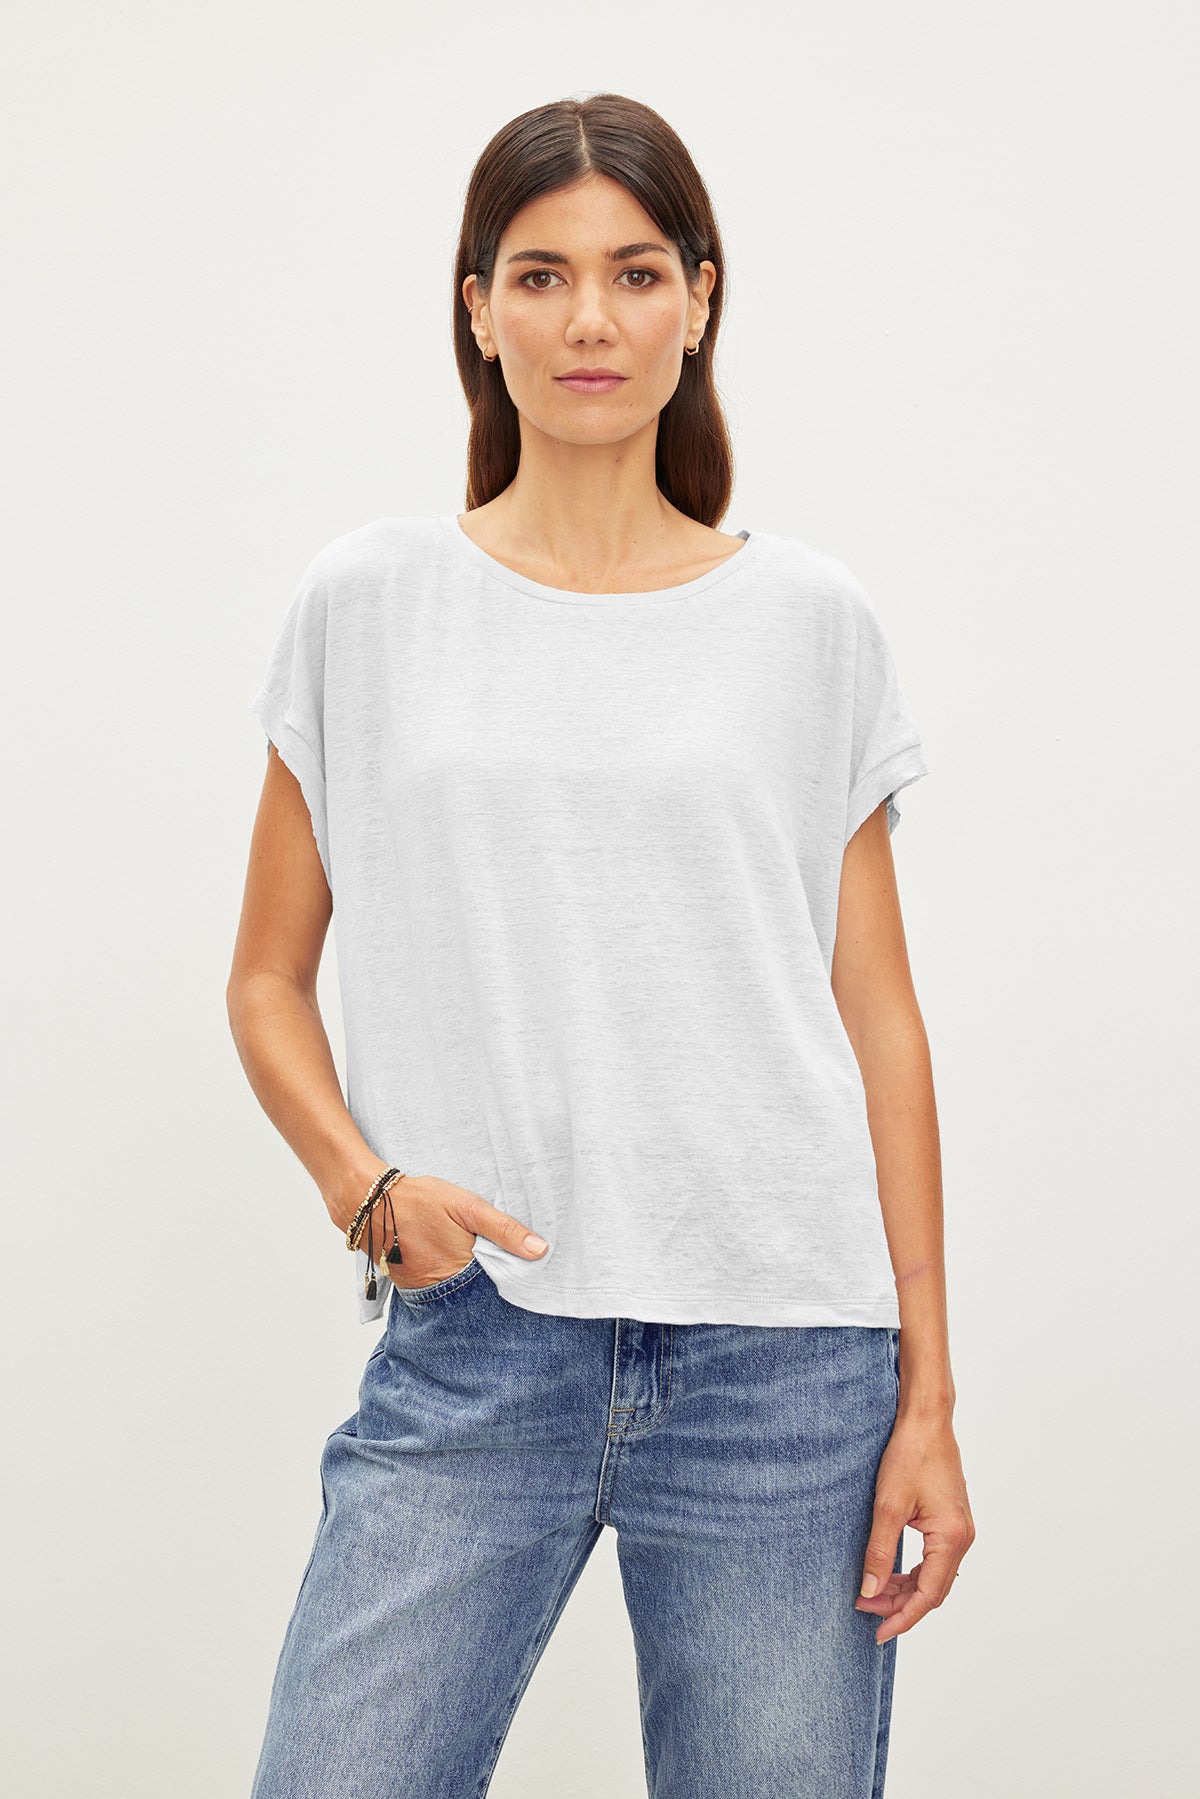 A woman wearing a white HUDSON CREW NECK TEE by Velvet by Graham & Spencer and jeans.-35967645483201